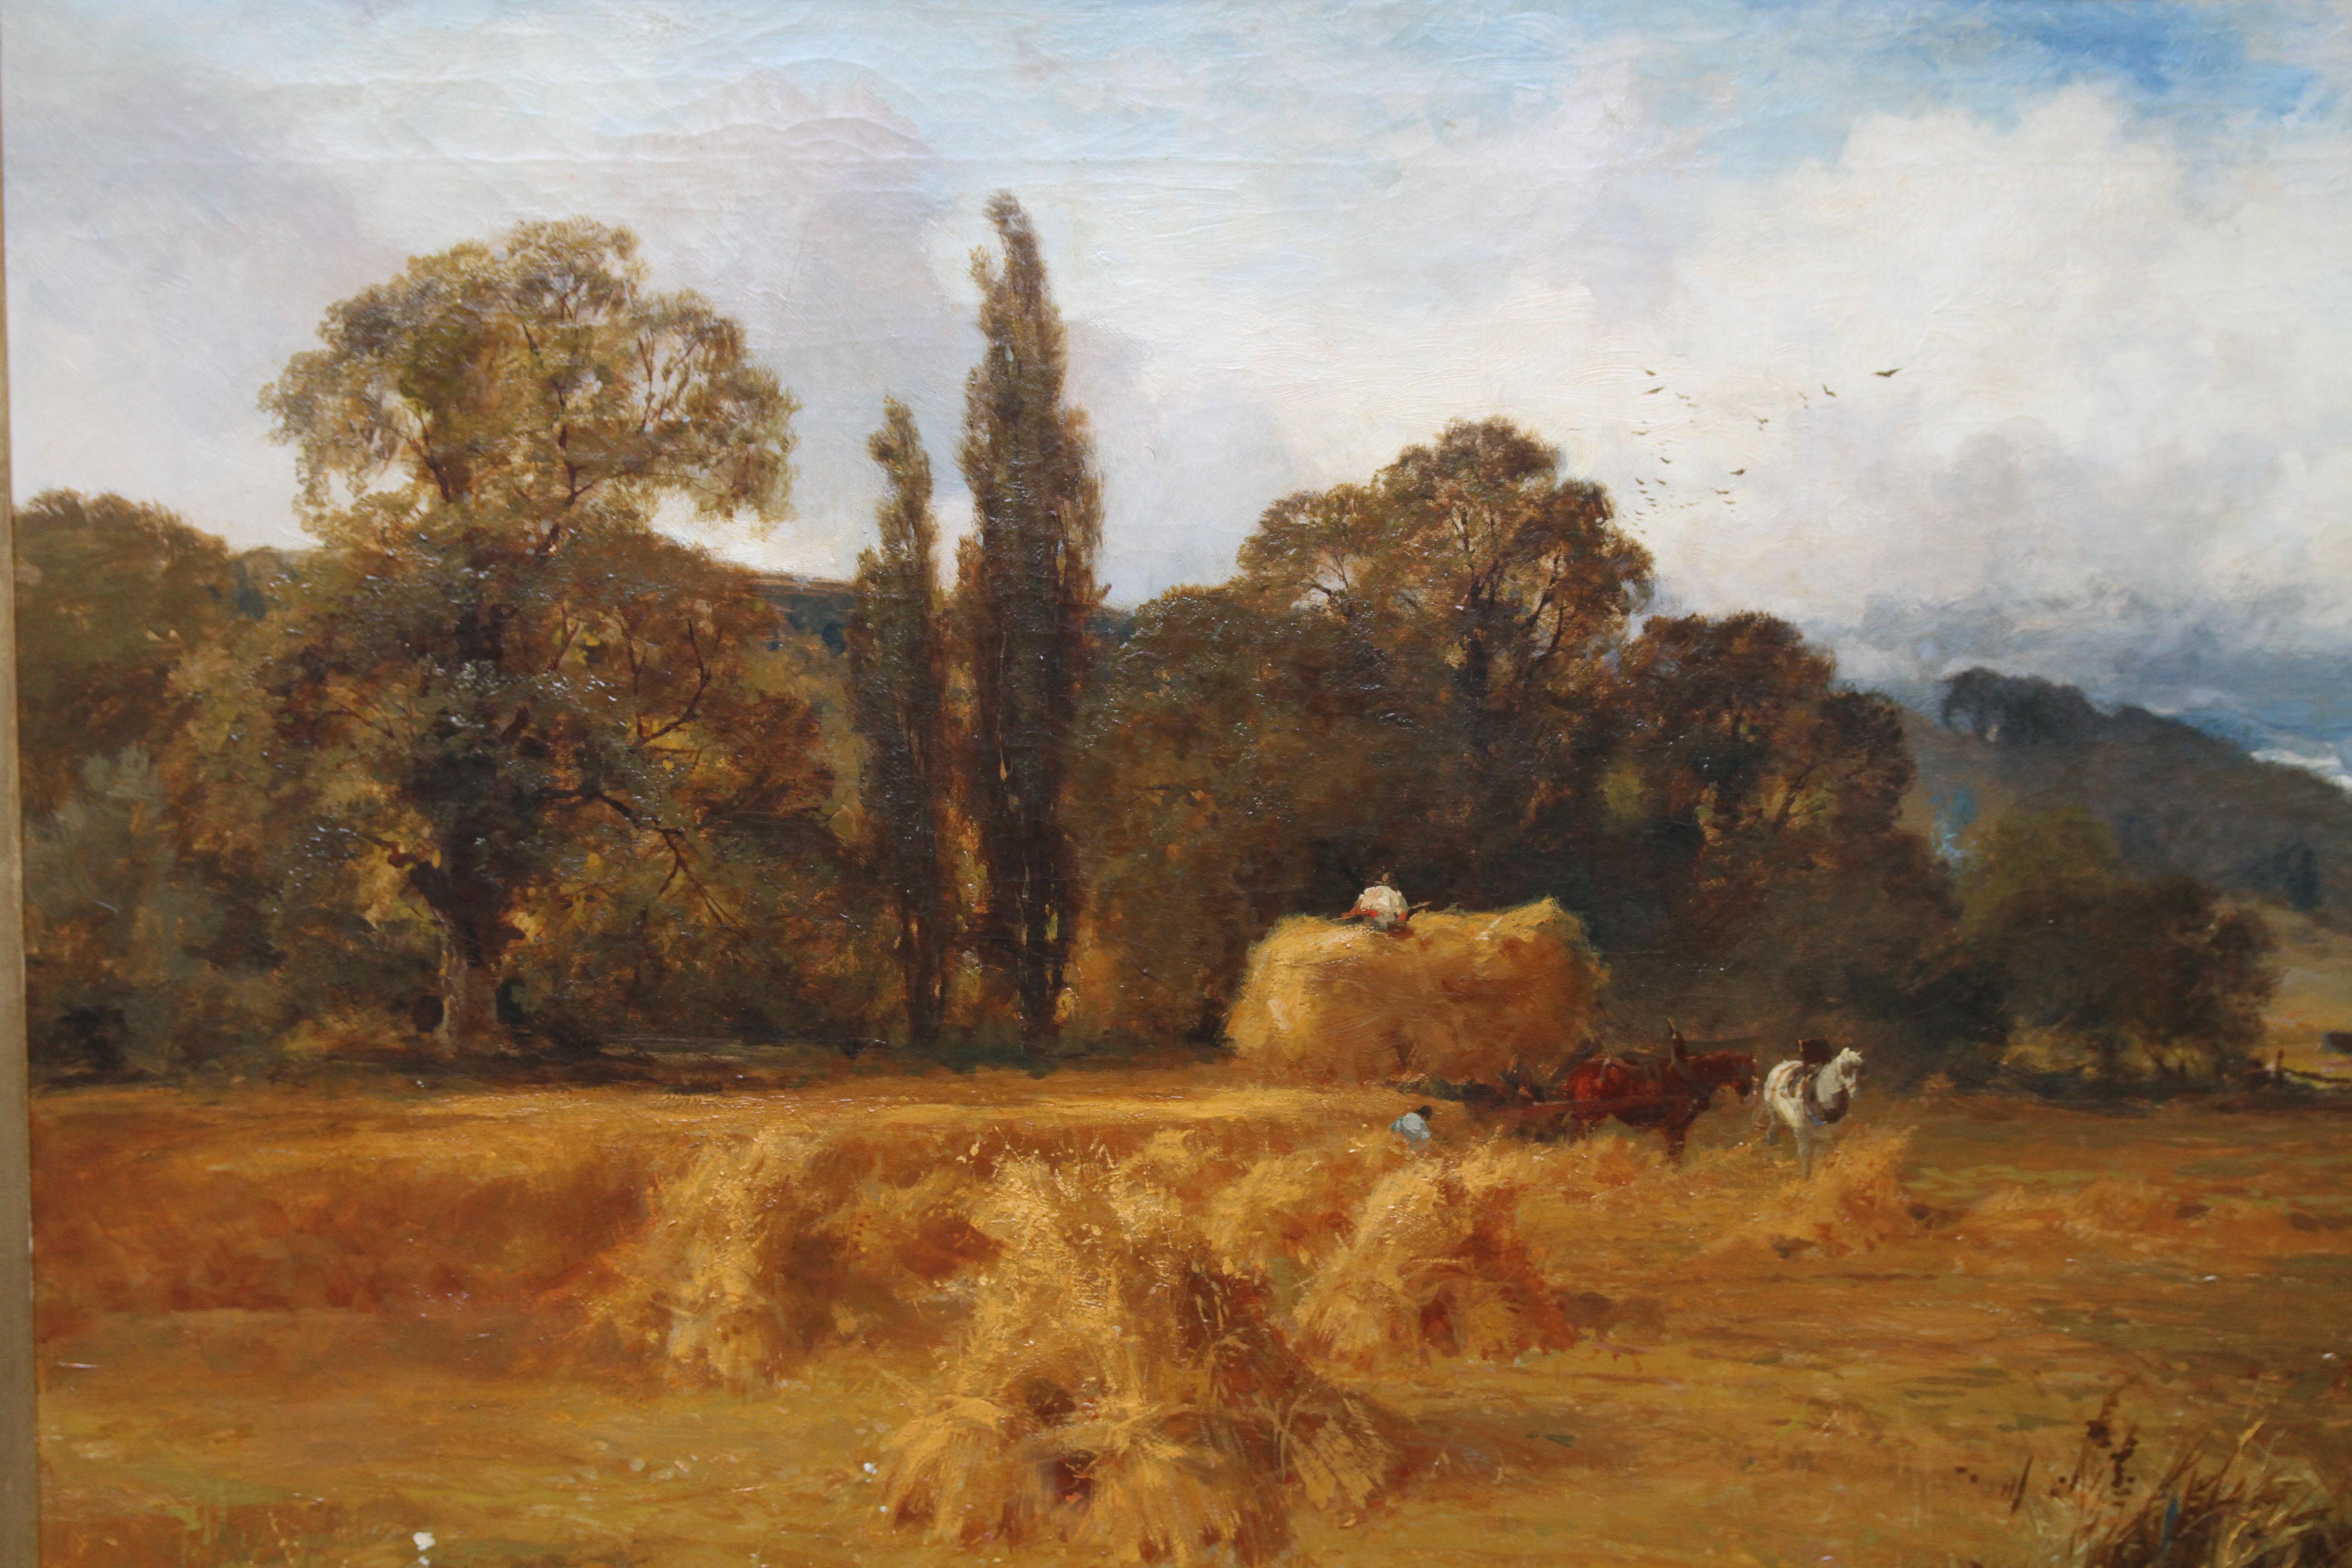 Harvest Time in Yorkshire - British art 19th century landscape oil painting - Realist Painting by John Horace Hooper